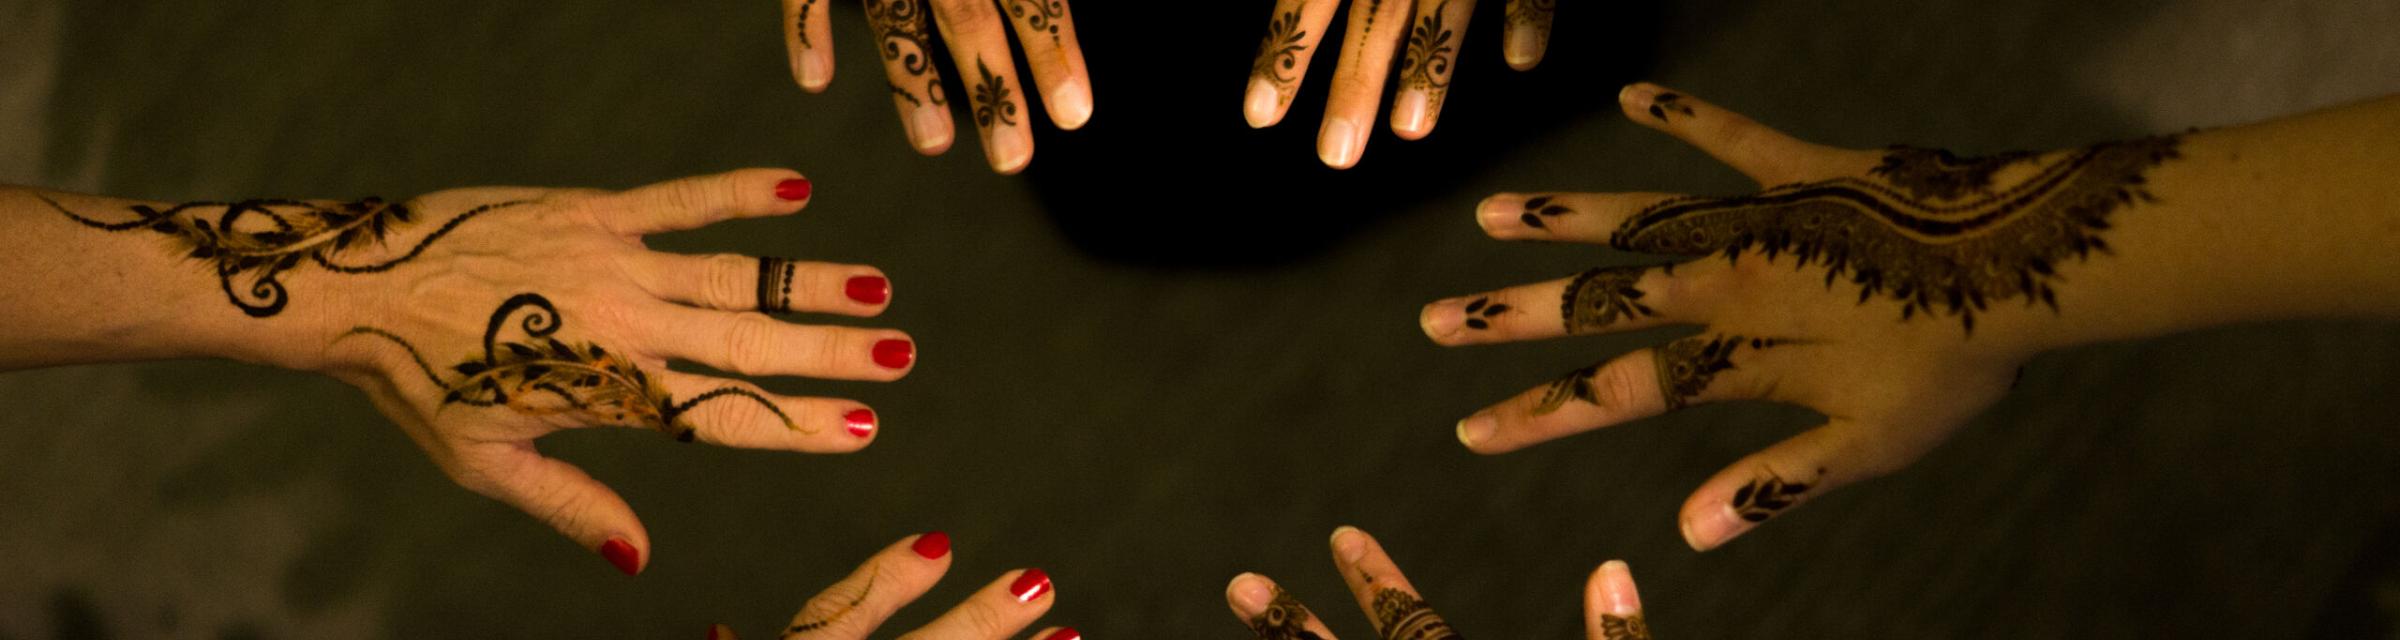 Henna designs provide artistic inspiration and the application provides quality time among women in the Arabian Peninsula.  
Photo by Andrew W.